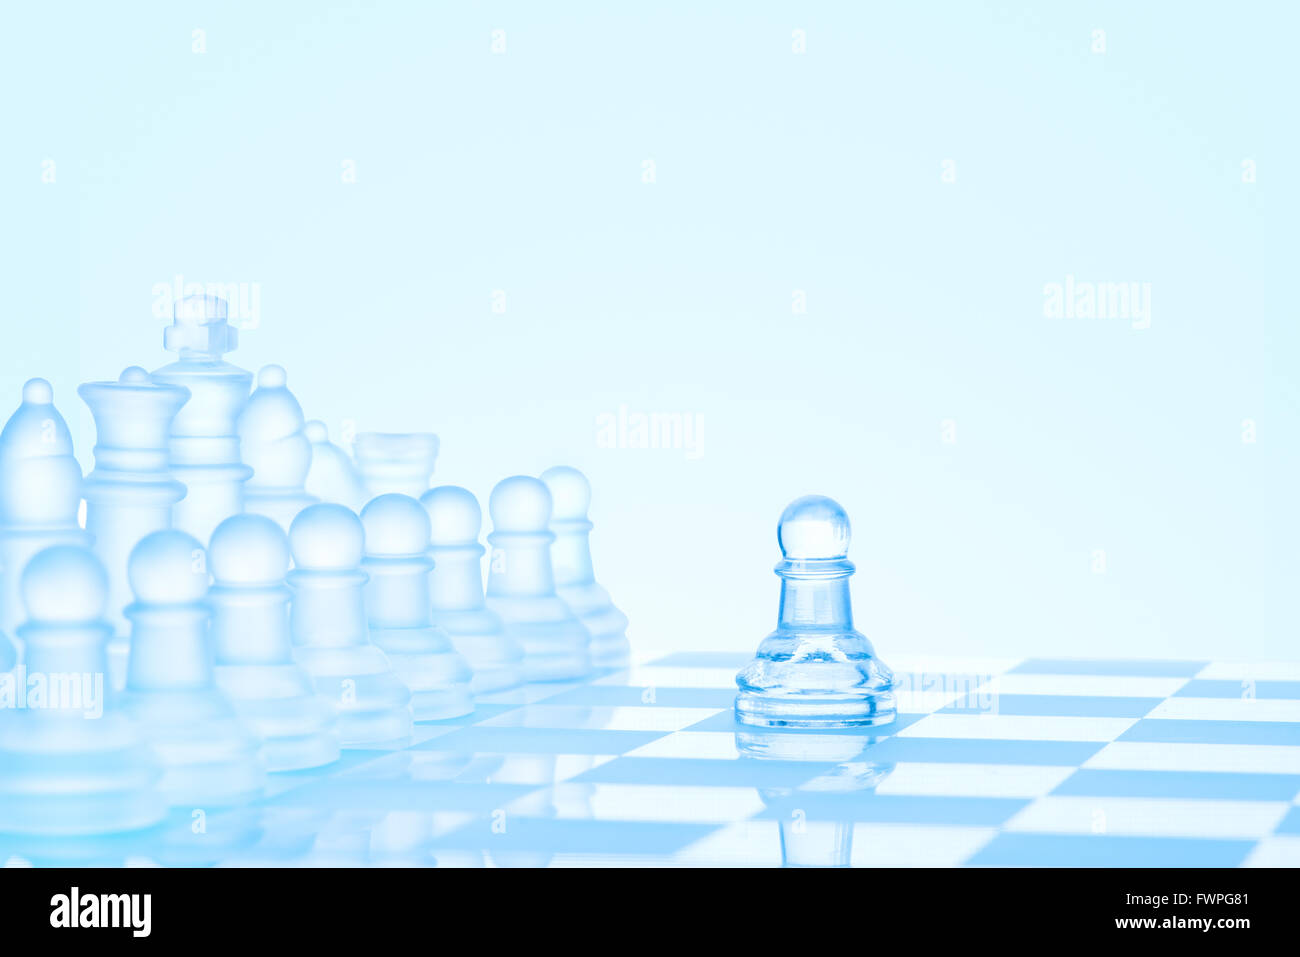 Leadership and bravery concept; an icy frosted single pawn staying against a full set of chess pieces on chessboard. Stock Photo